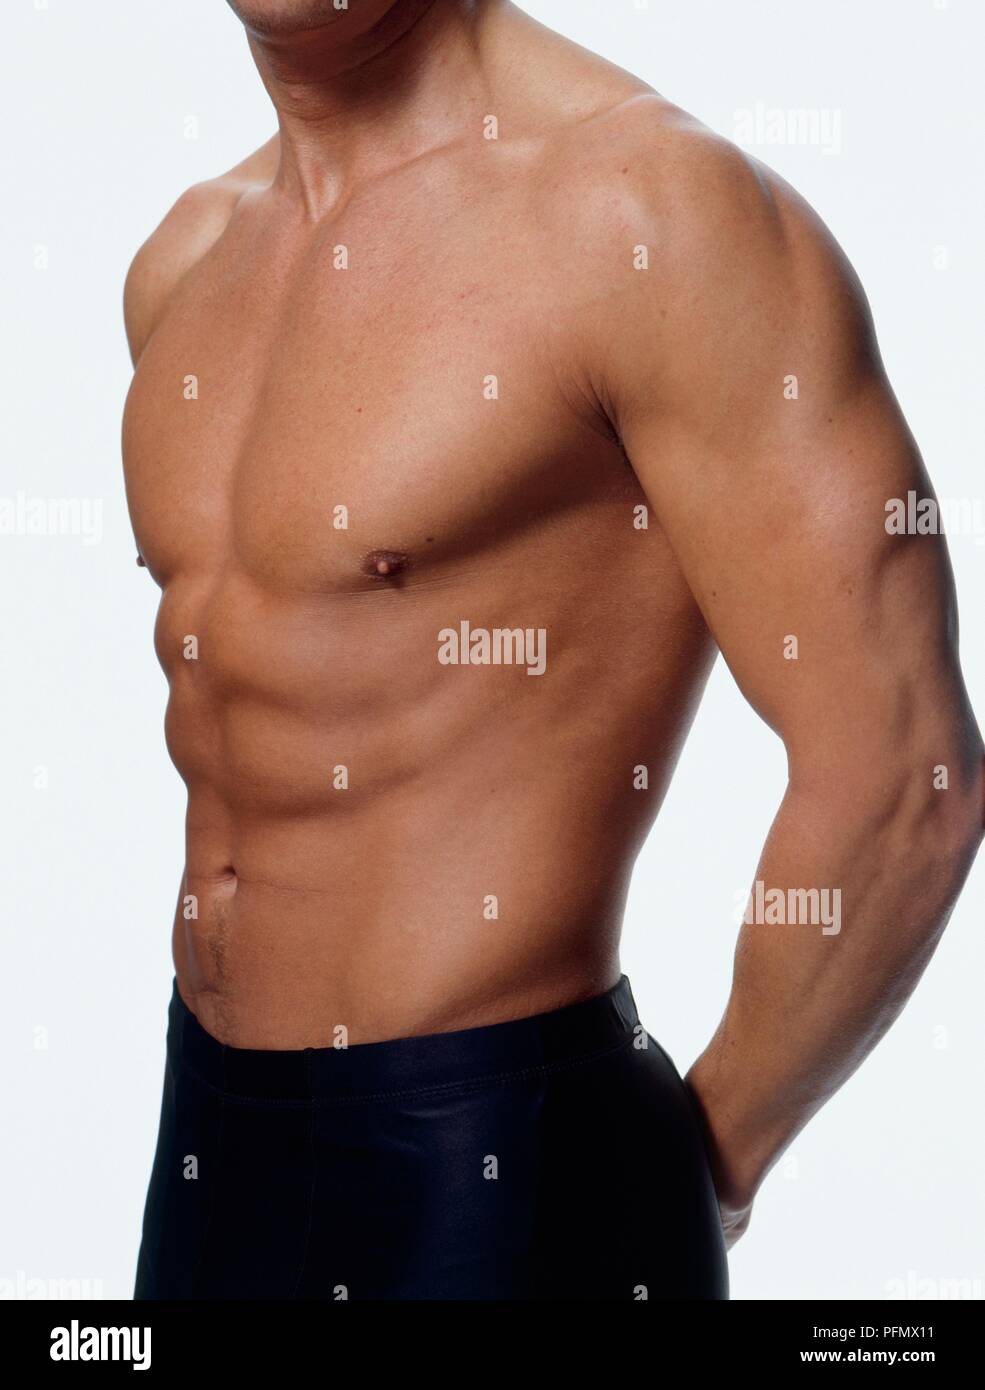 Man showing well-defined chest, abdominal, and arm muscles Stock